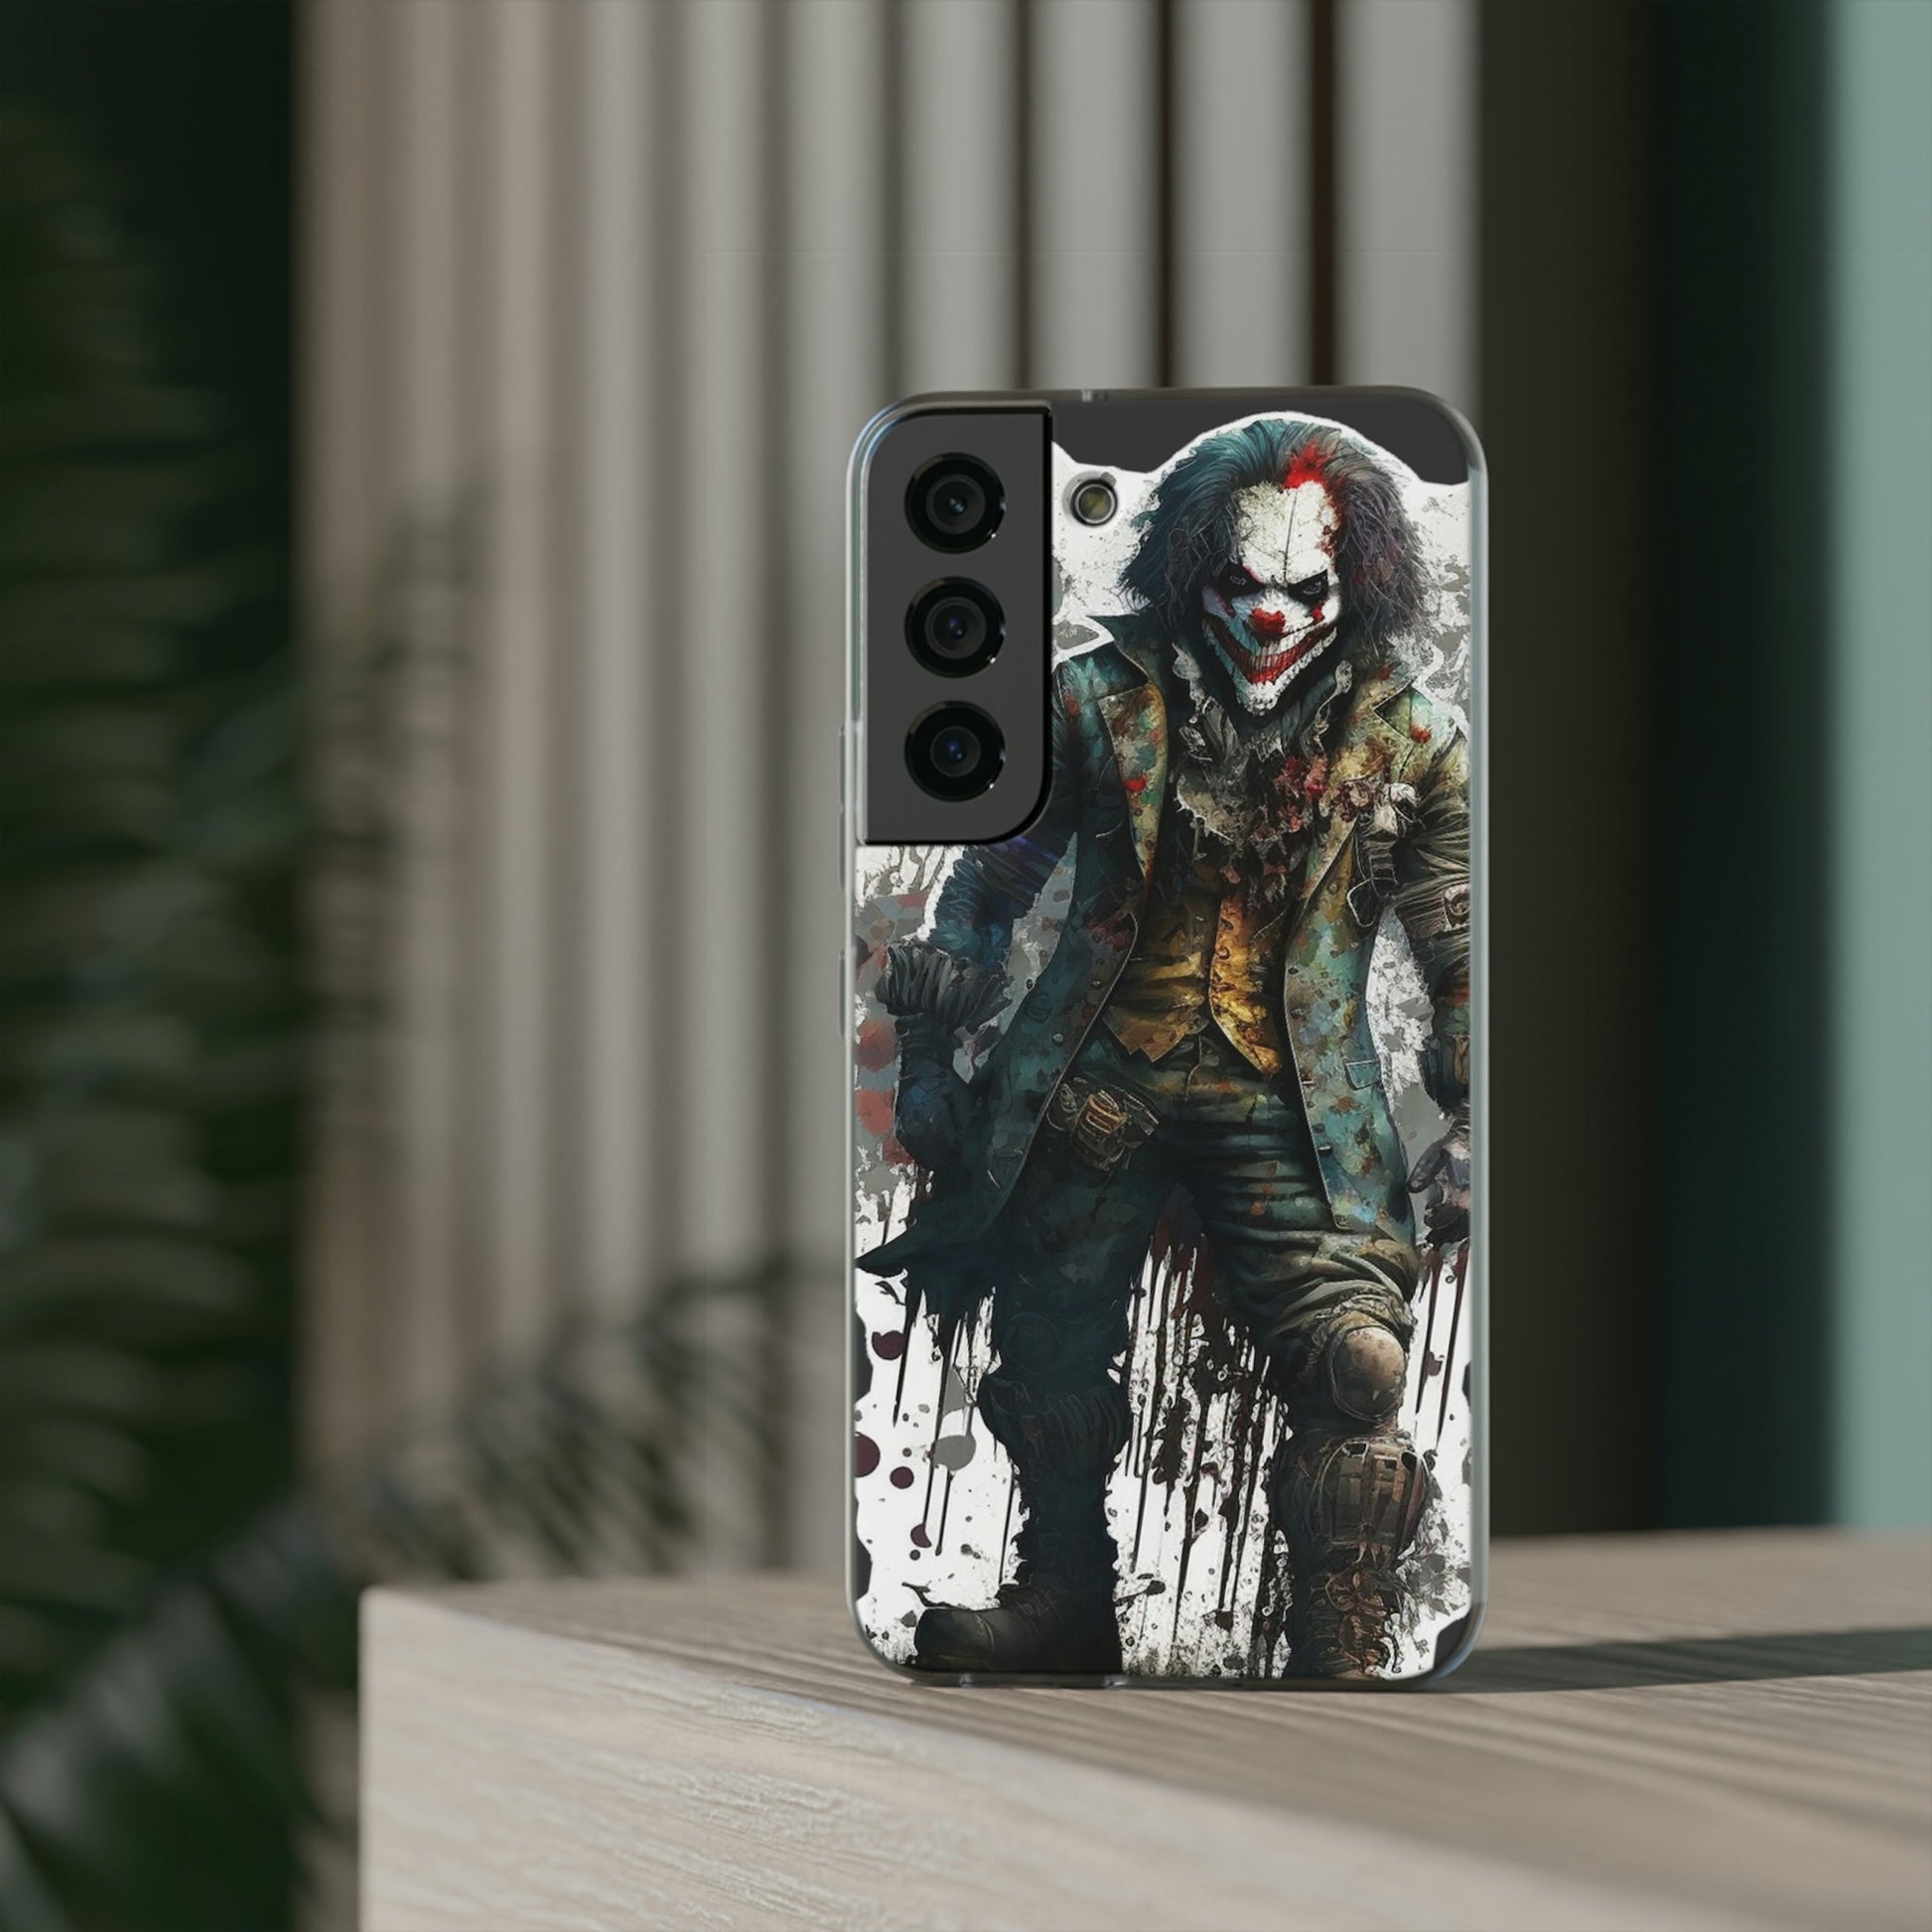 Scary Clown Phone Cases